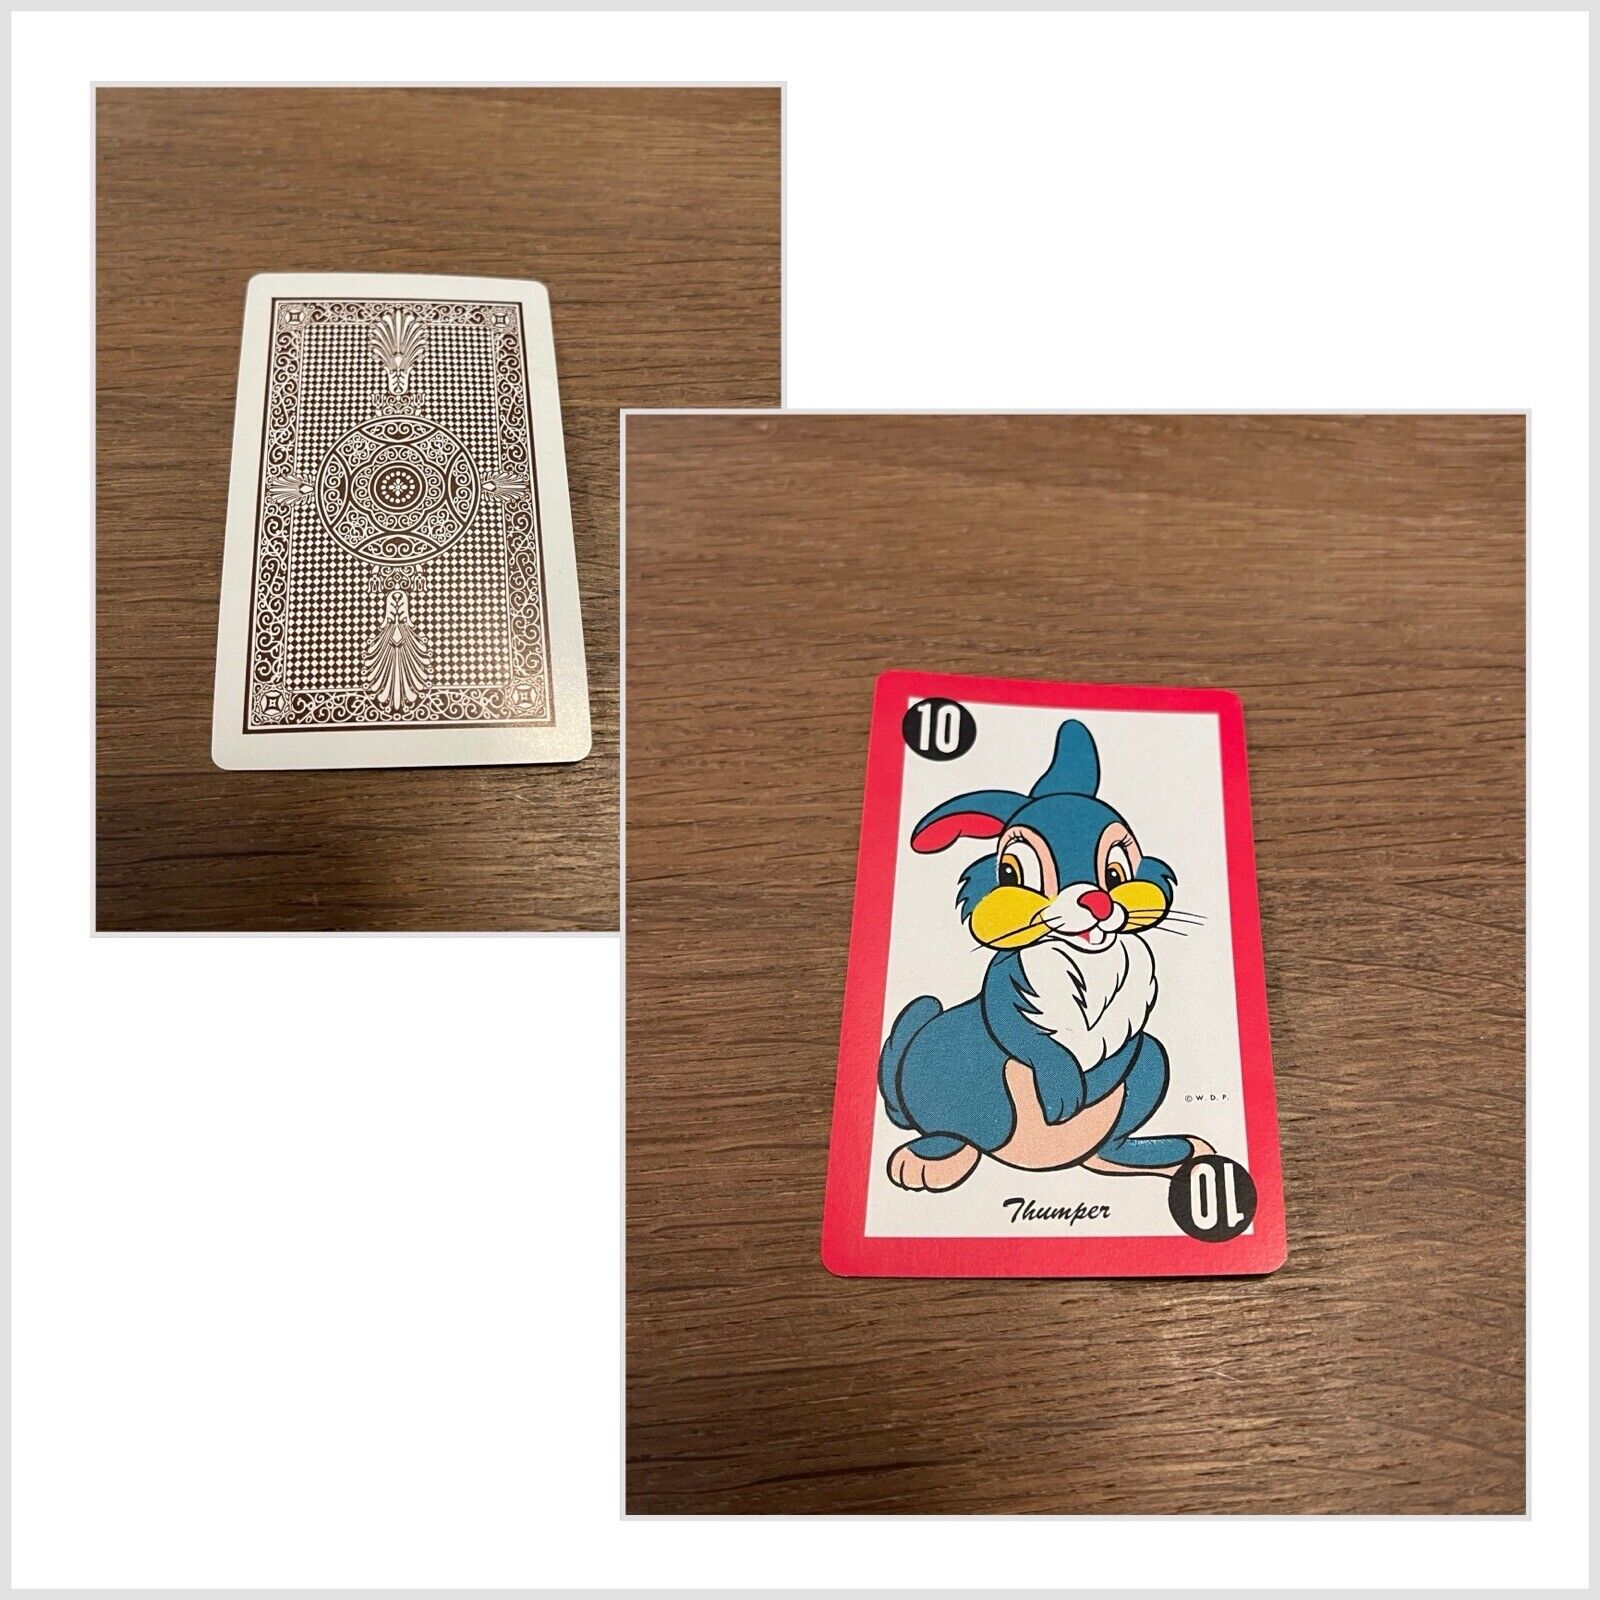 RARE VINTAGE 1949 WHITMAN DISNEY DONALD DUCK PLAYING CARD GAME THUMPER CARD